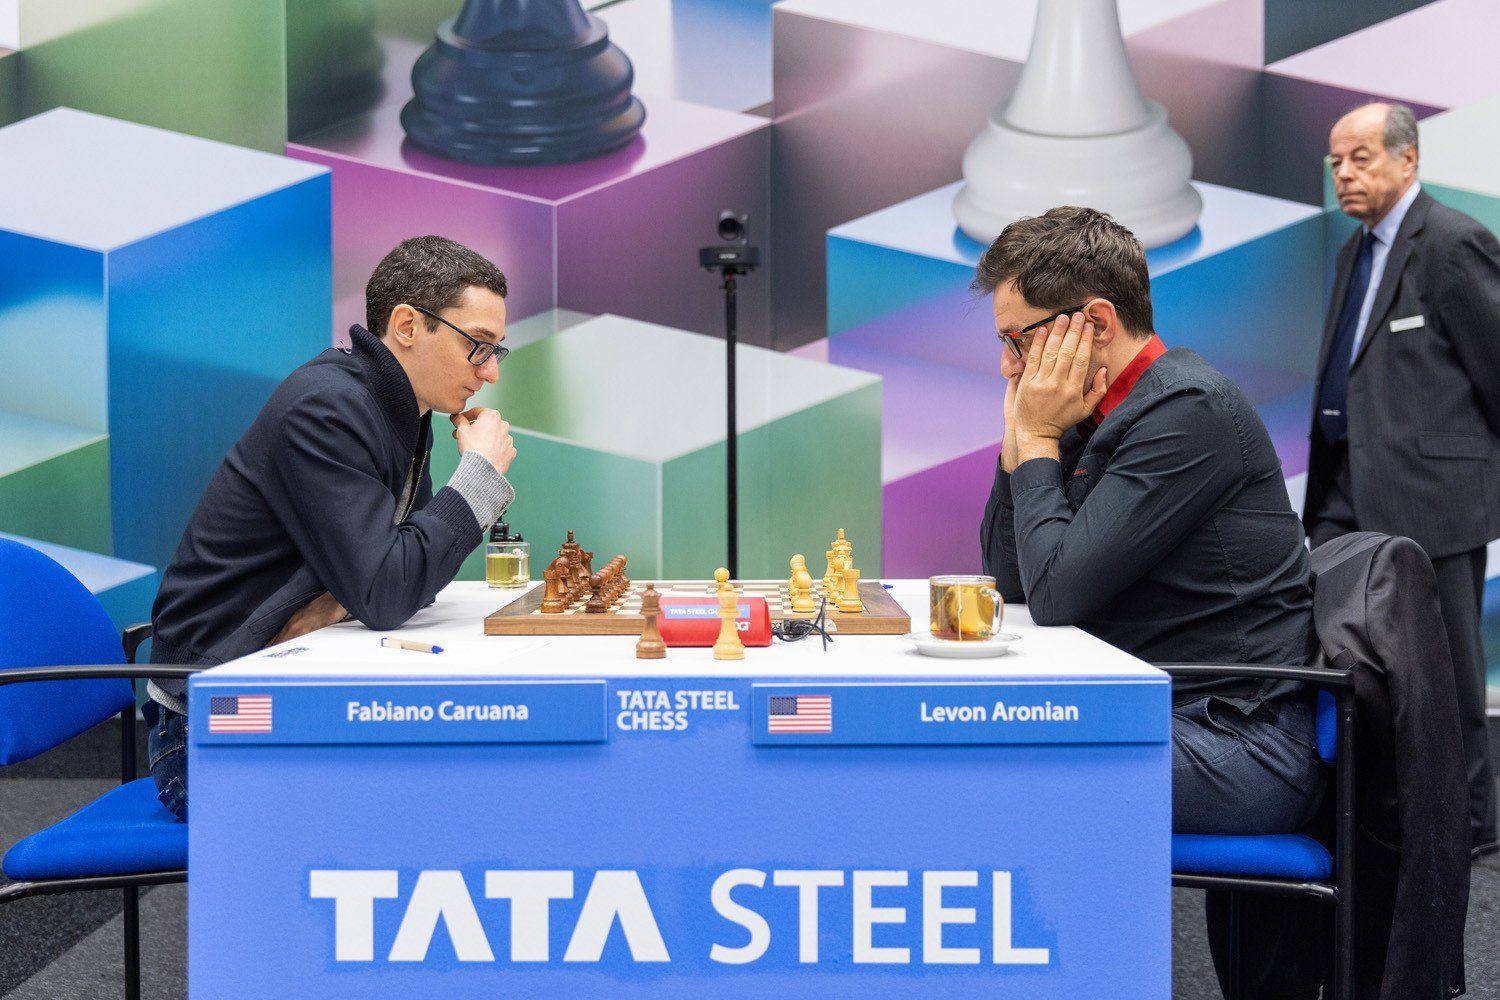 Tata Steel Chess - Games and standings